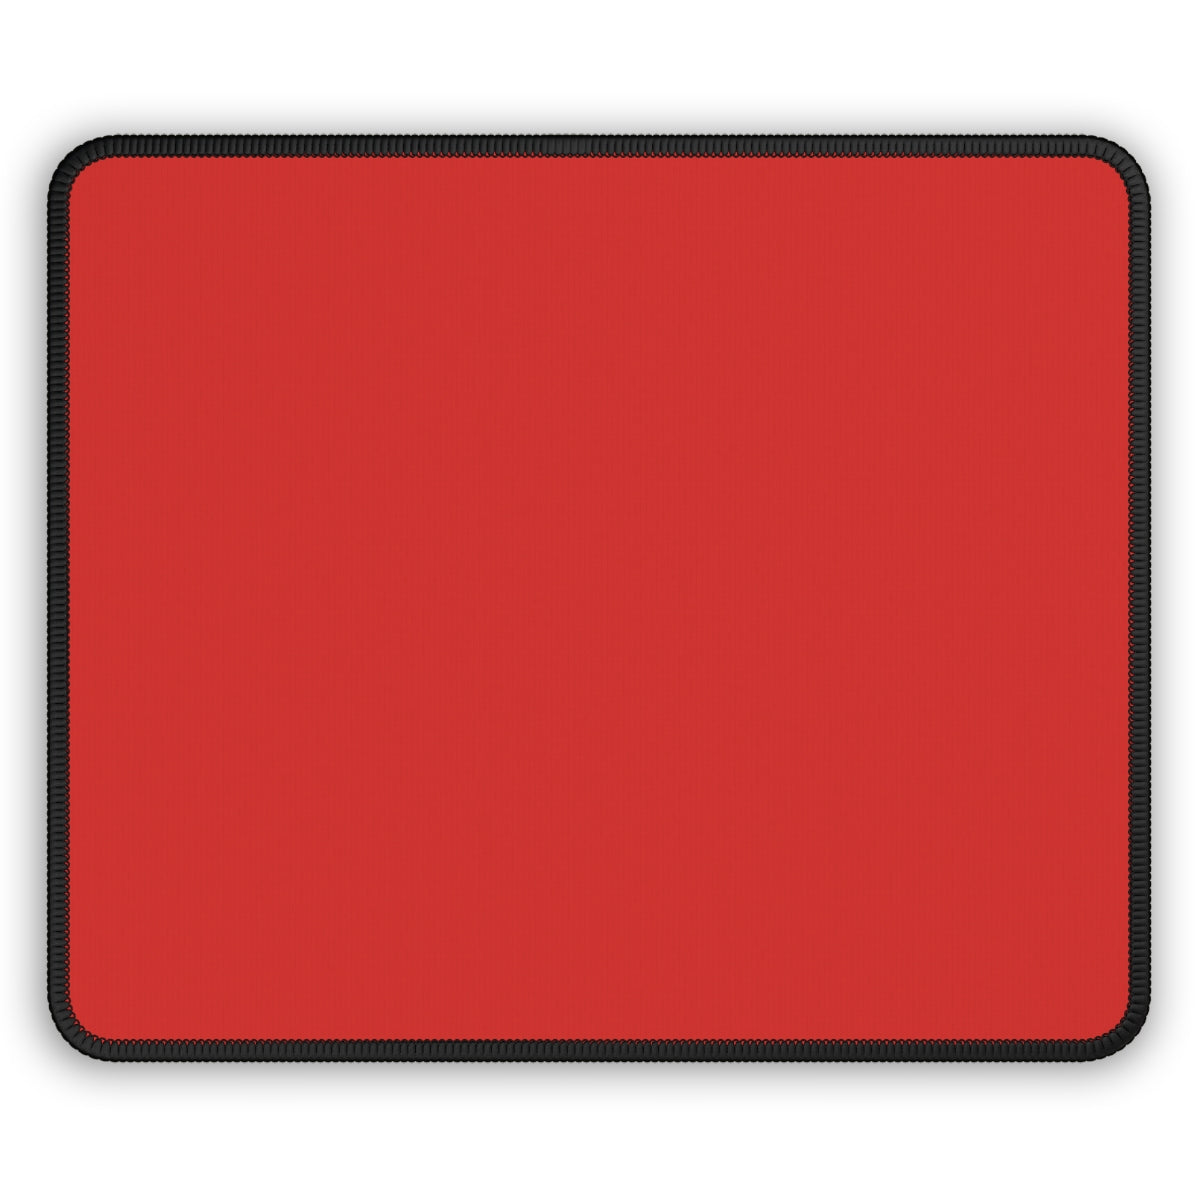 Red Gaming Mouse Pad - Desk Cookies